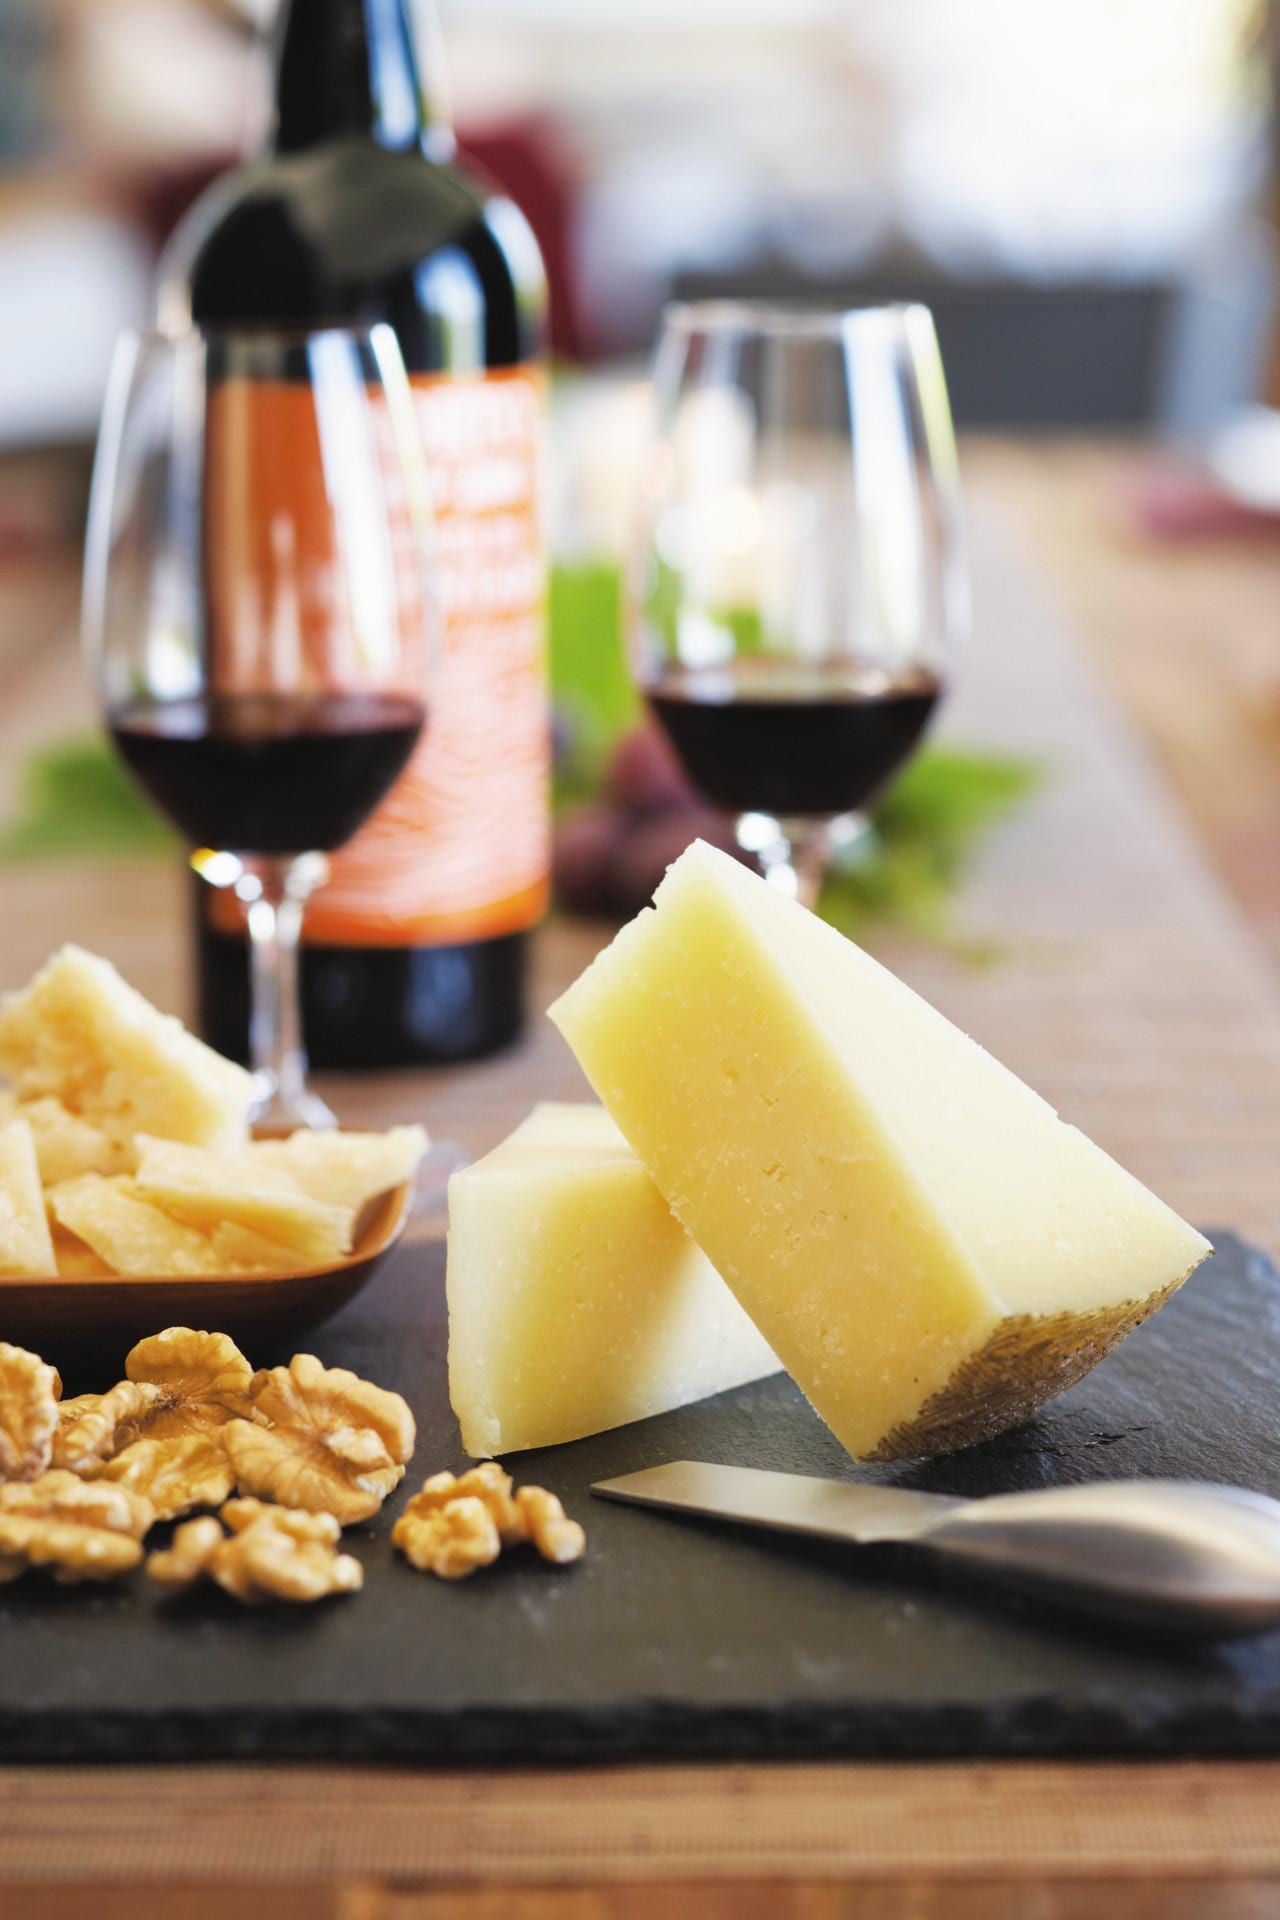 wine-and-cheese-pairing-wine-with-monterey-jack-cheese-tbr-news-media